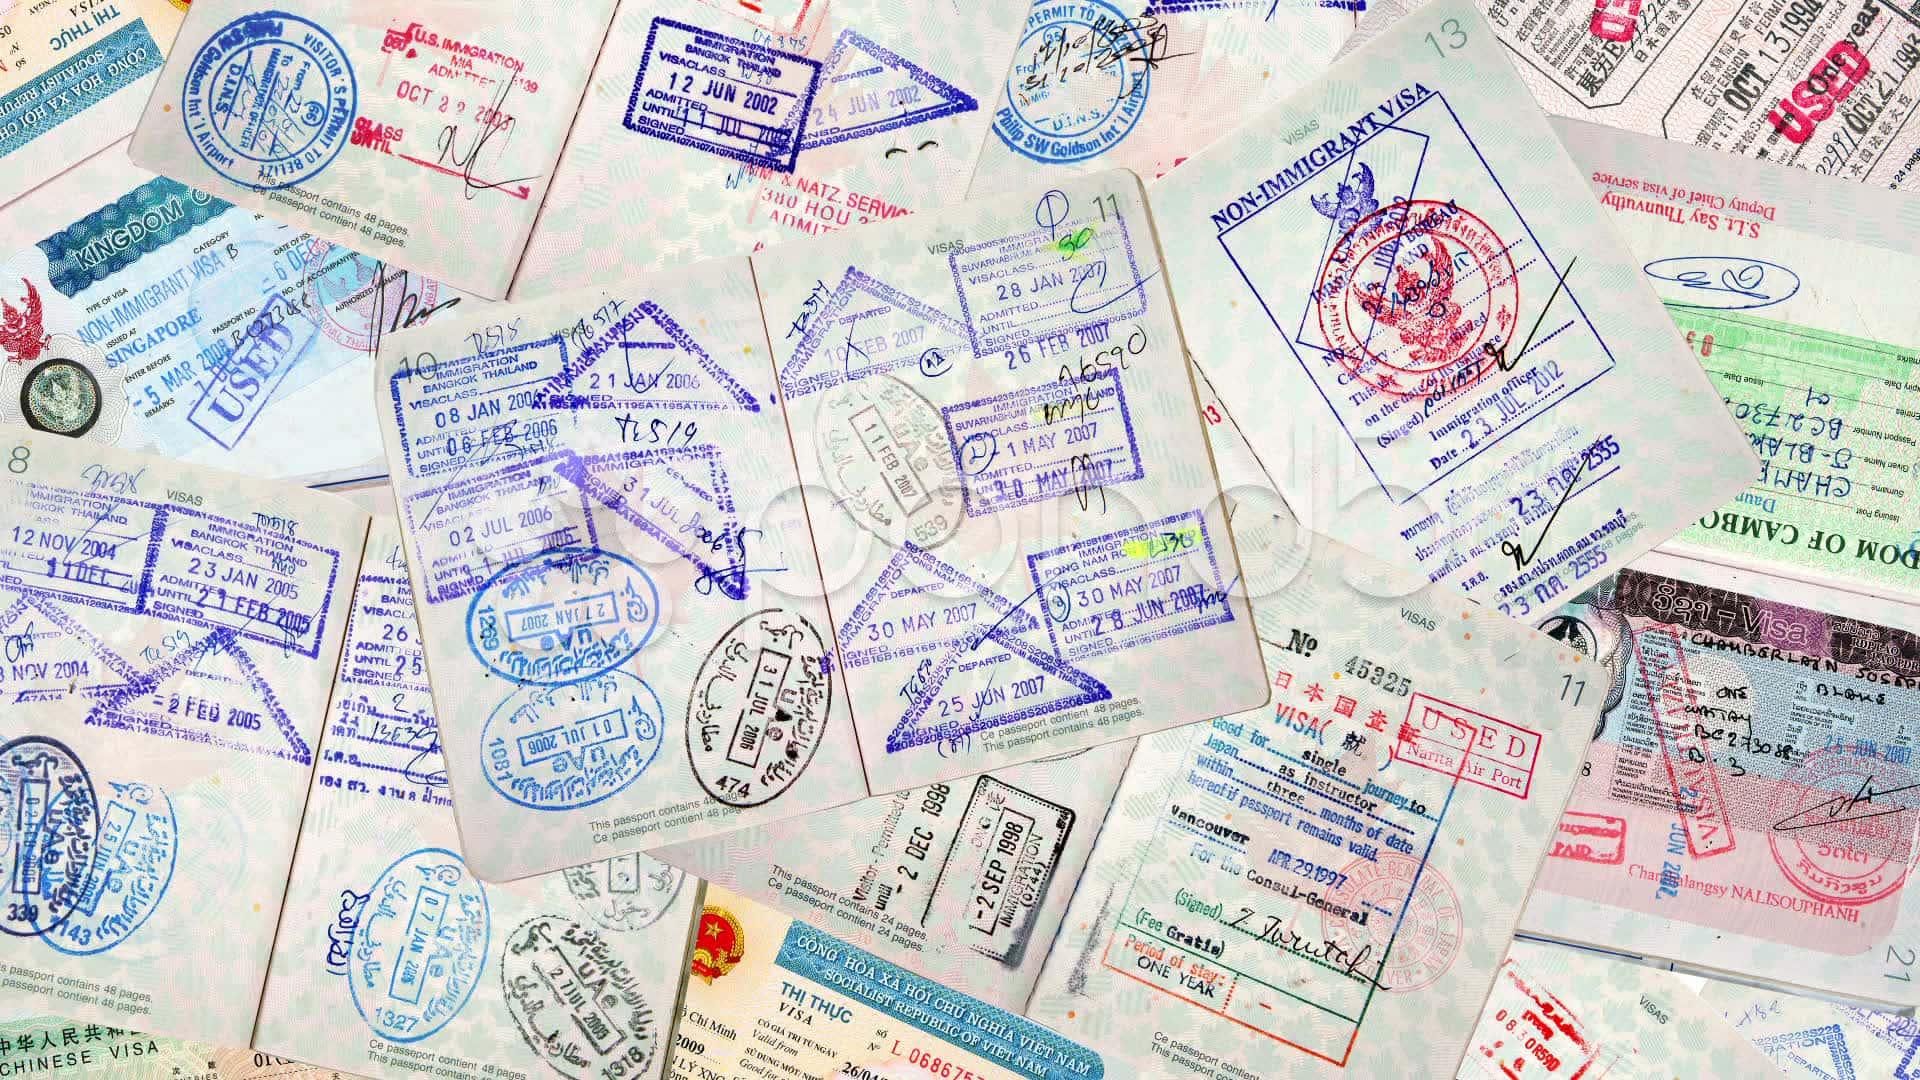 Many Different Passports And Visas Are Arranged In A Pile